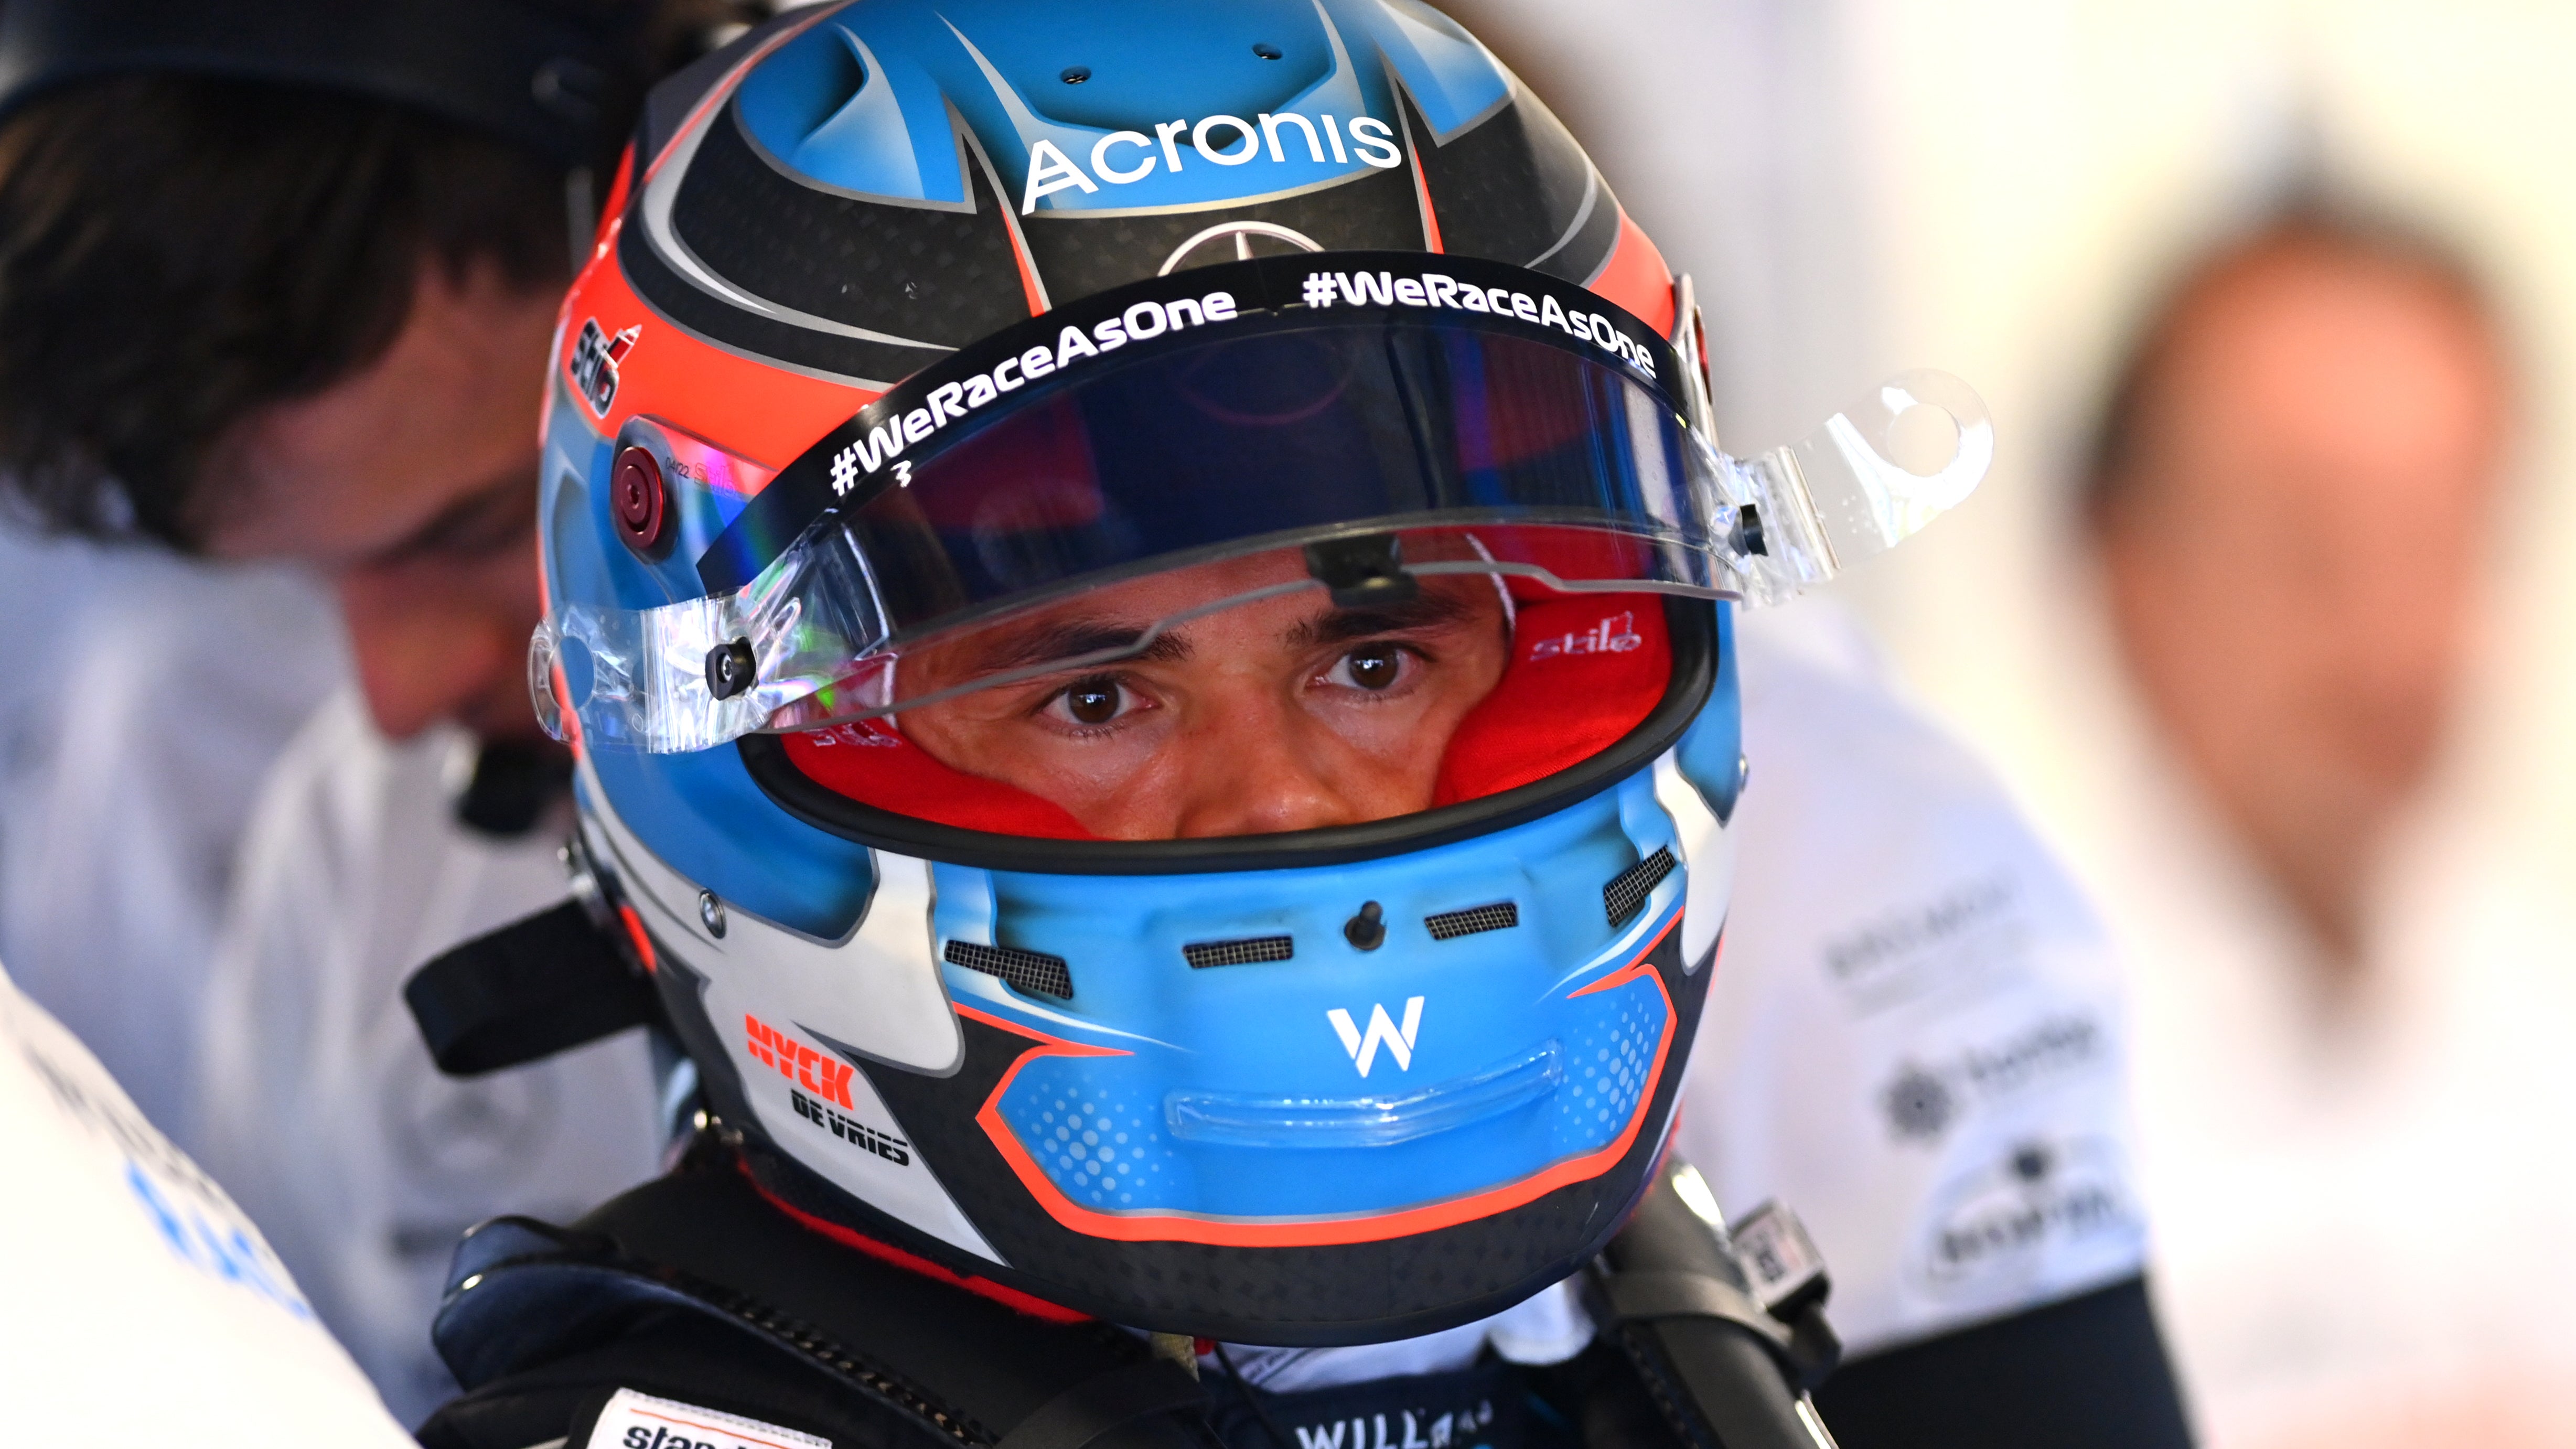 Nyck de Vries finished in the points for Williams after stepping in for Alex Albon